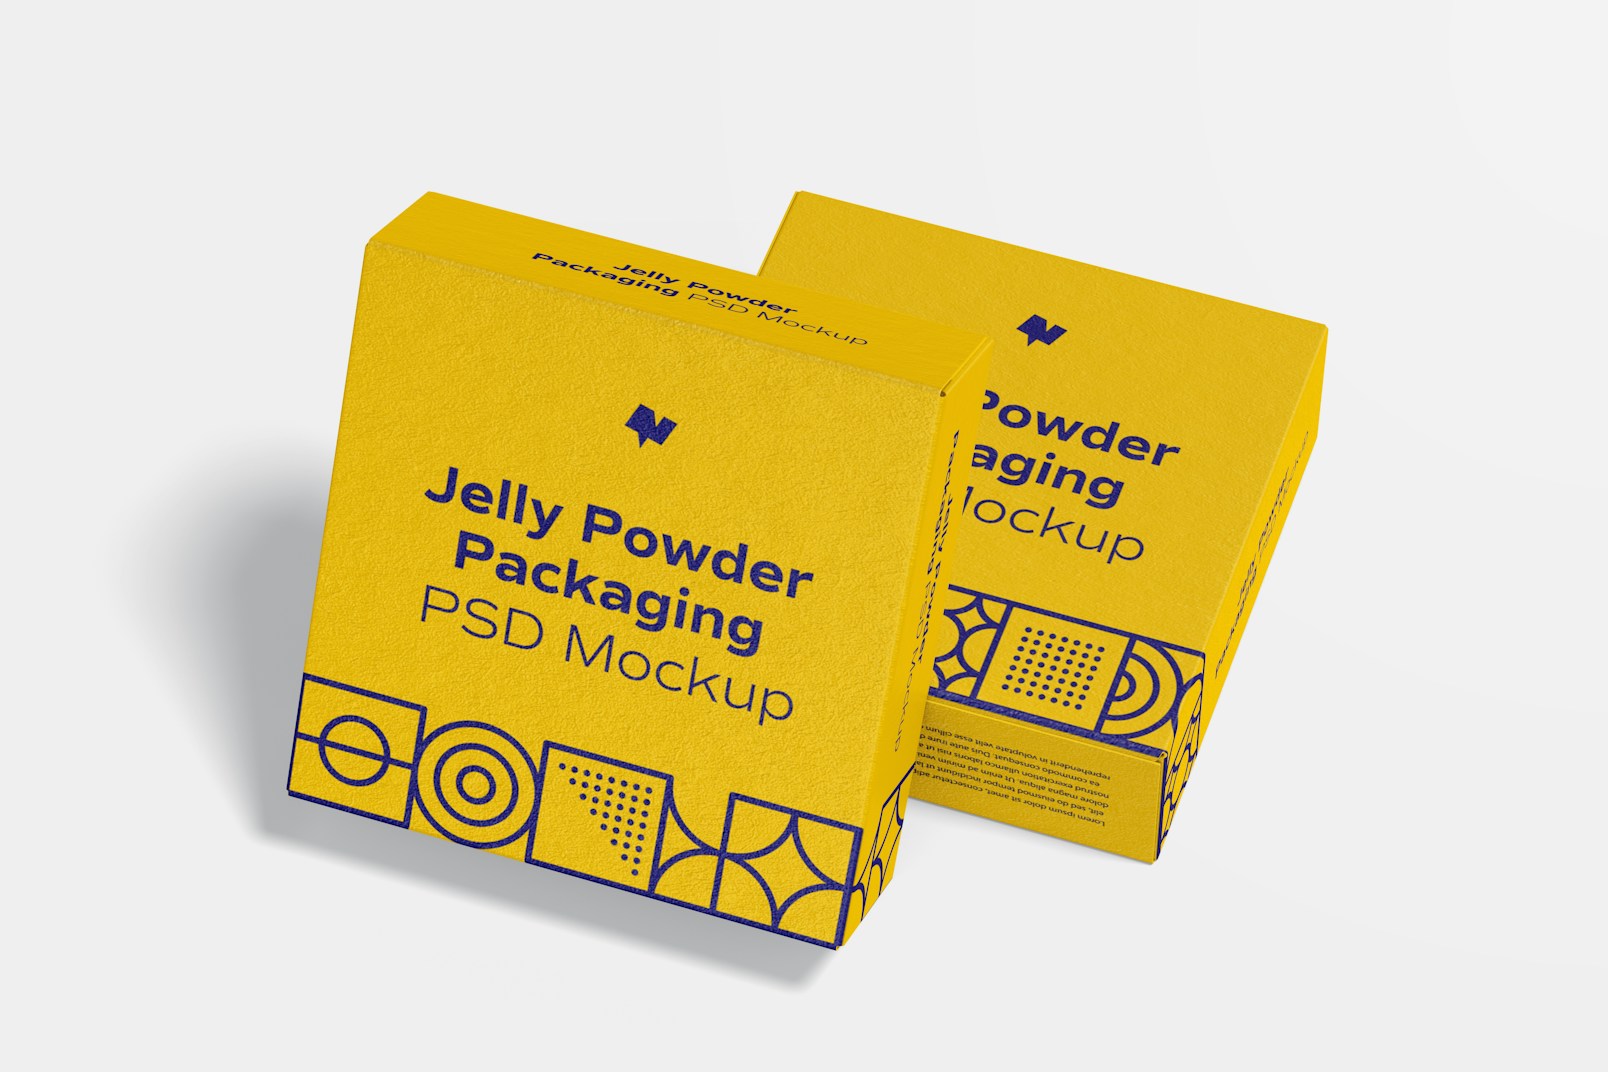 Jelly Powder Packaging Mockup, Left View